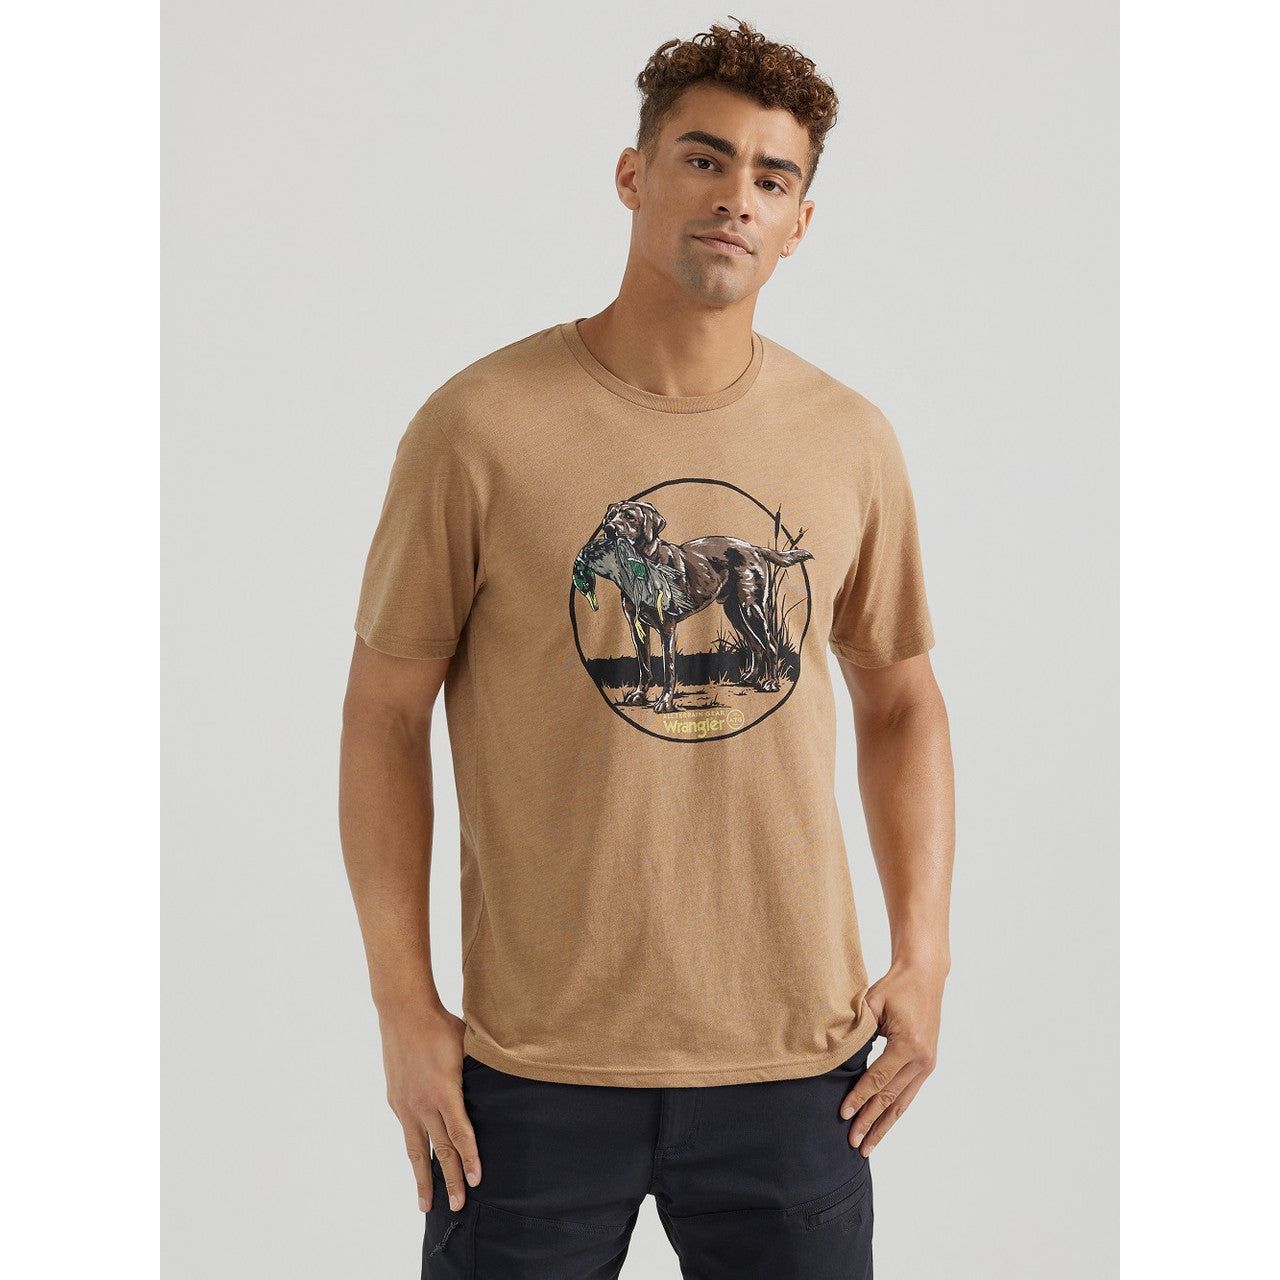 MEN'S ATG BY WRANGLER® FRONT GRAPHIC T-SHIRT IN CINNAMON SWIRL HEATHER